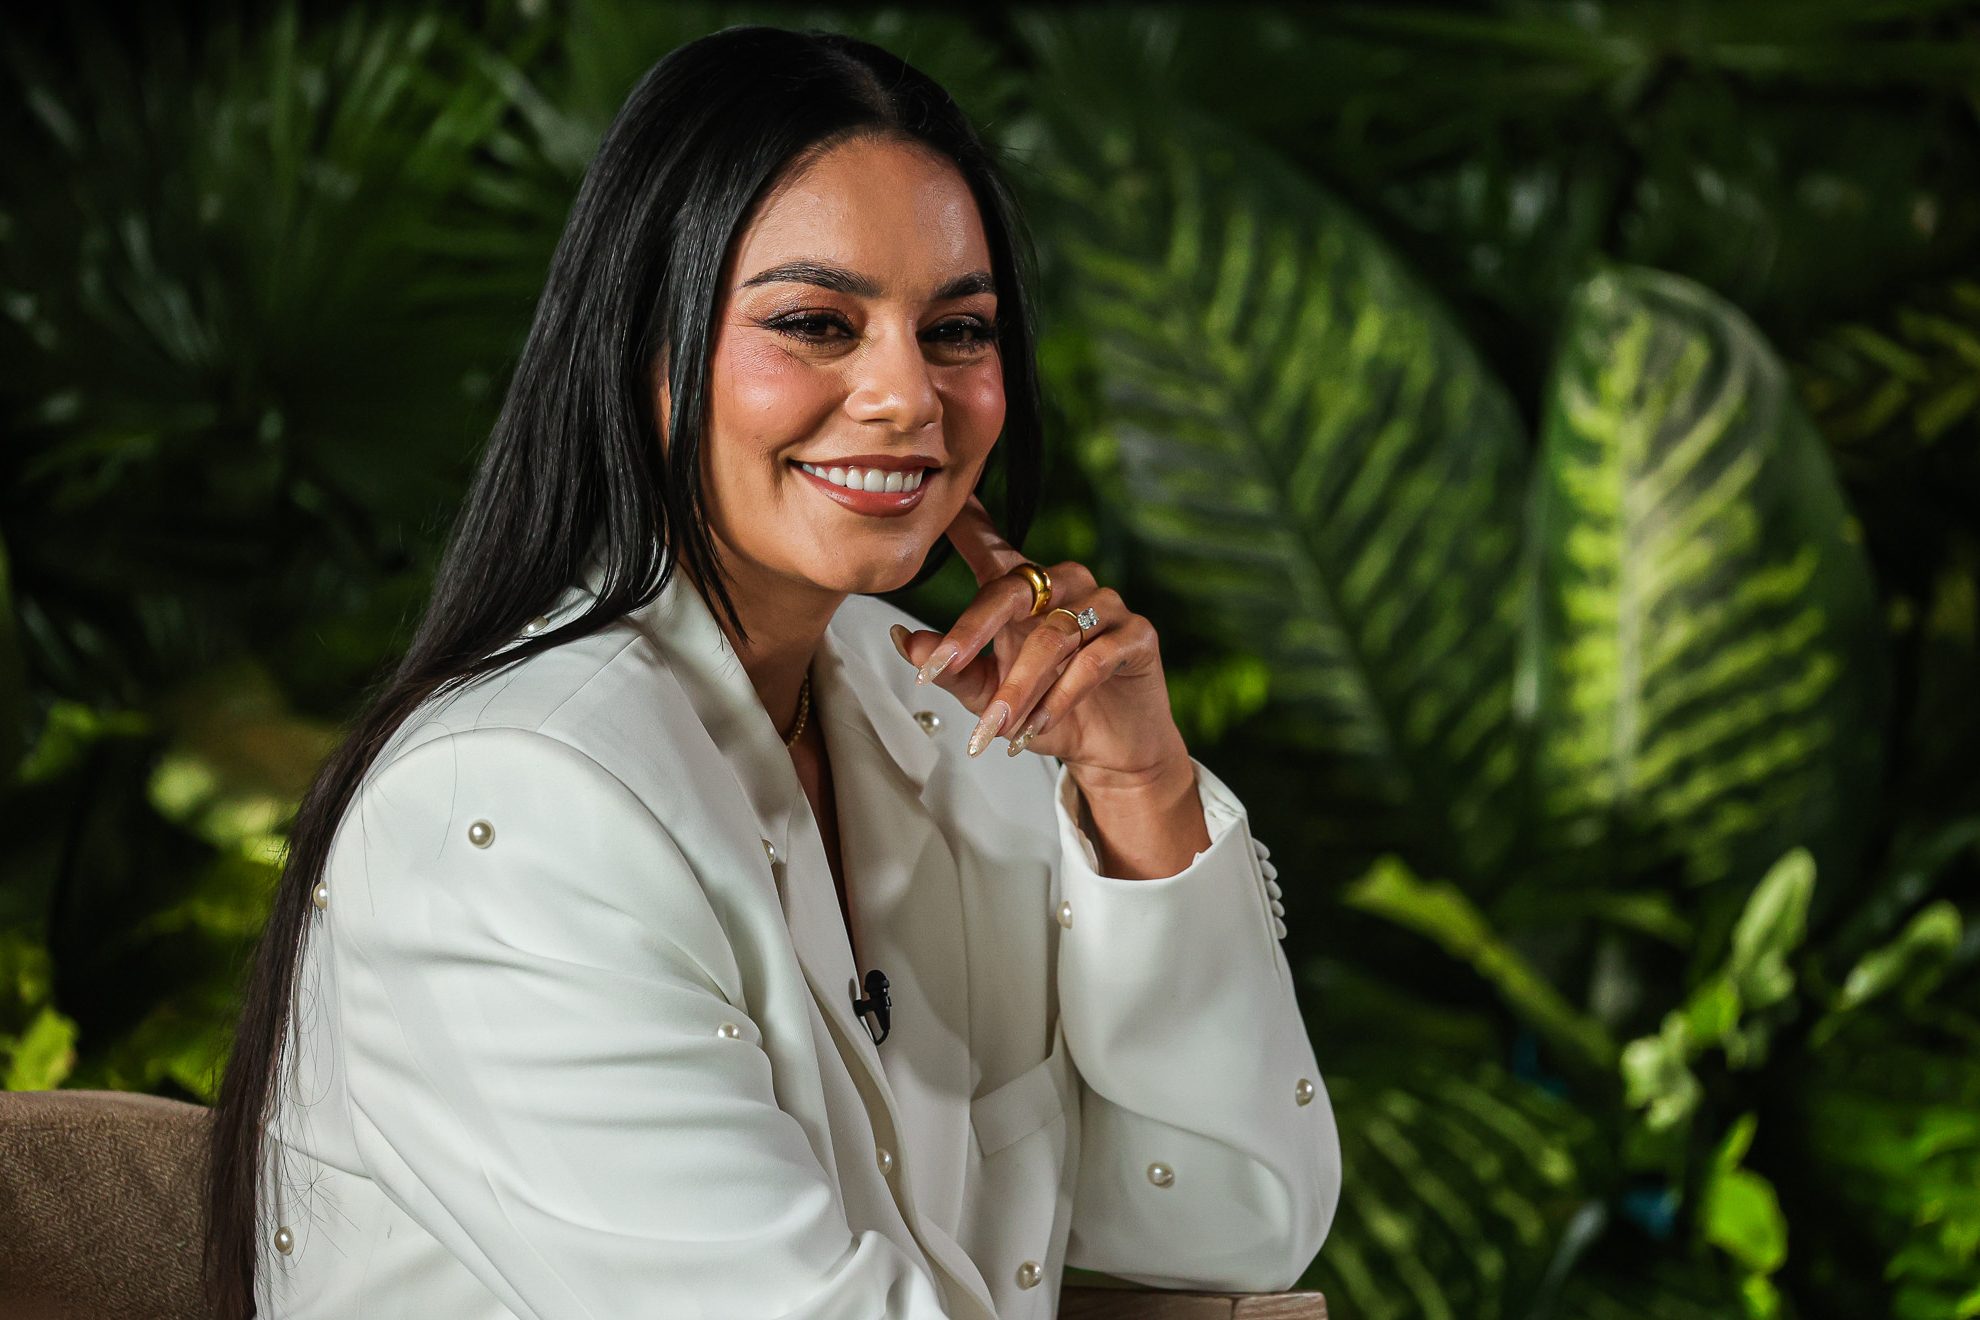 Vanessa Hudgens opens up about her first visit to the Philippines